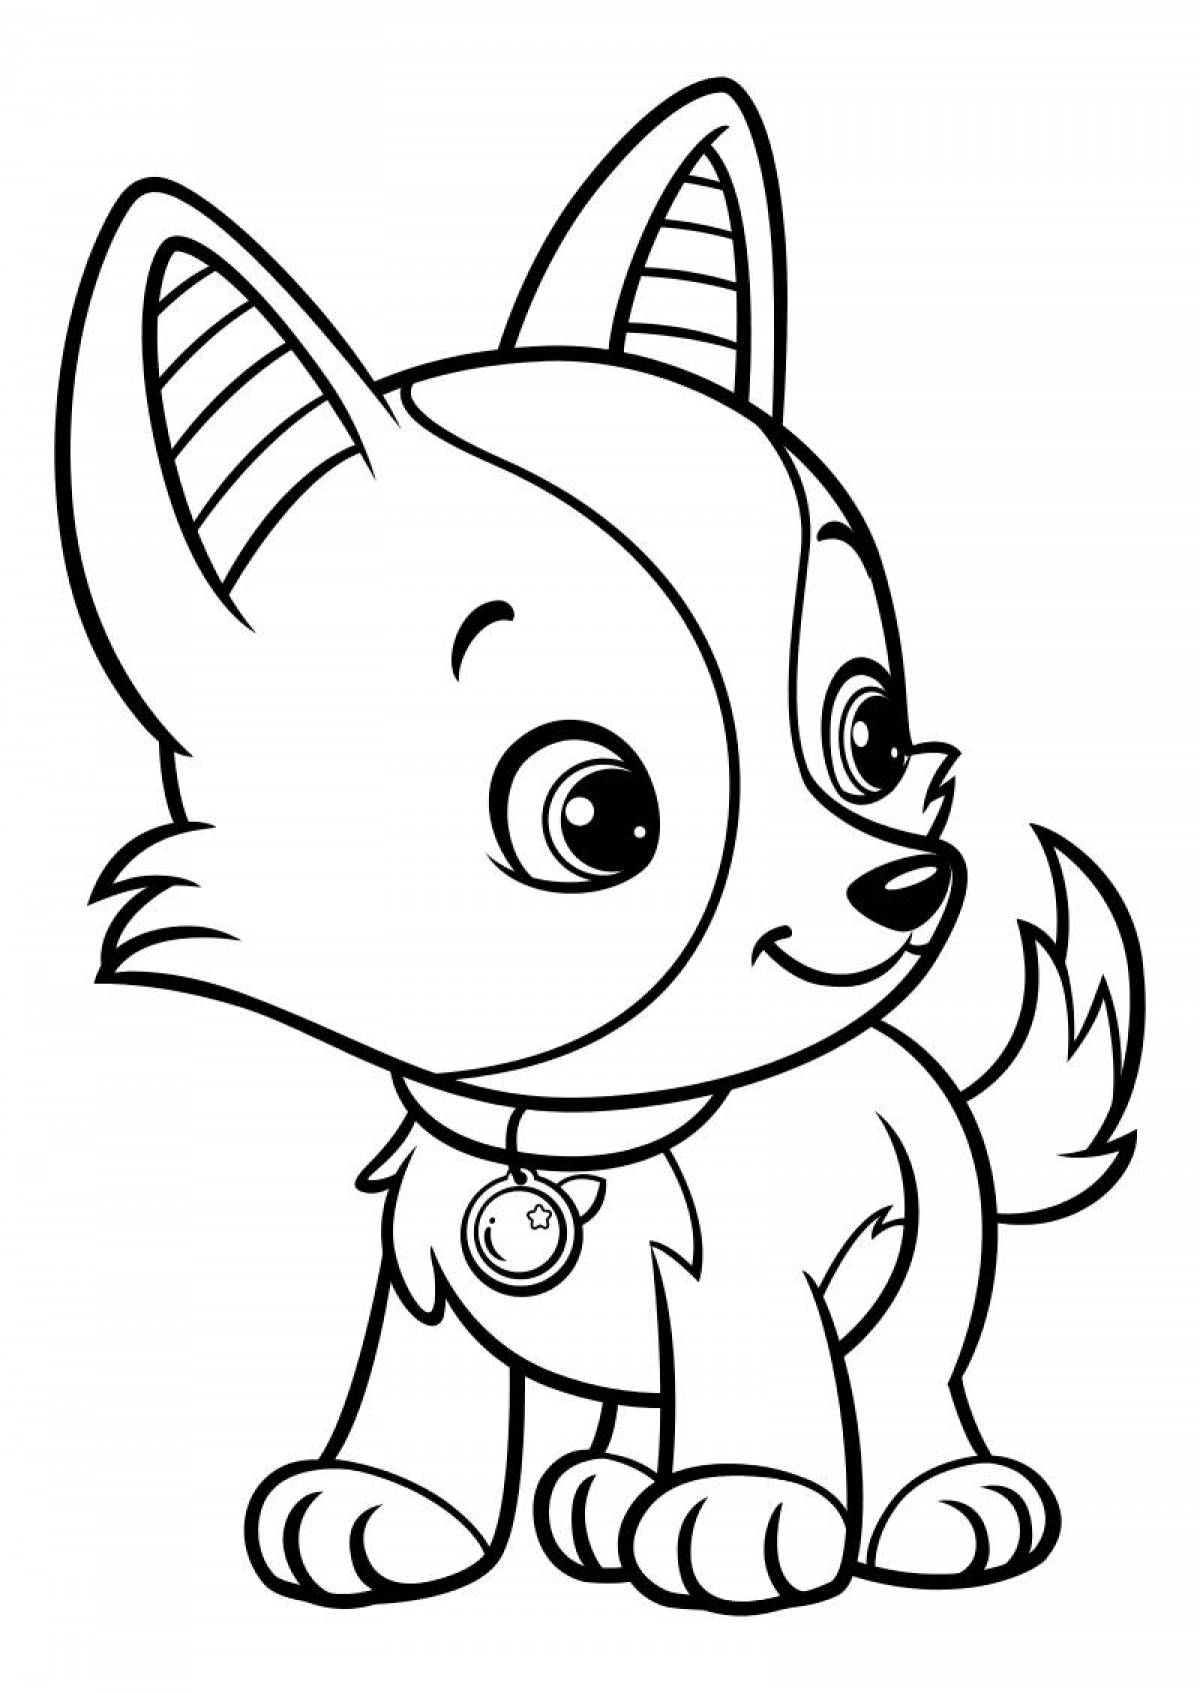 Big eared dog coloring book kittens